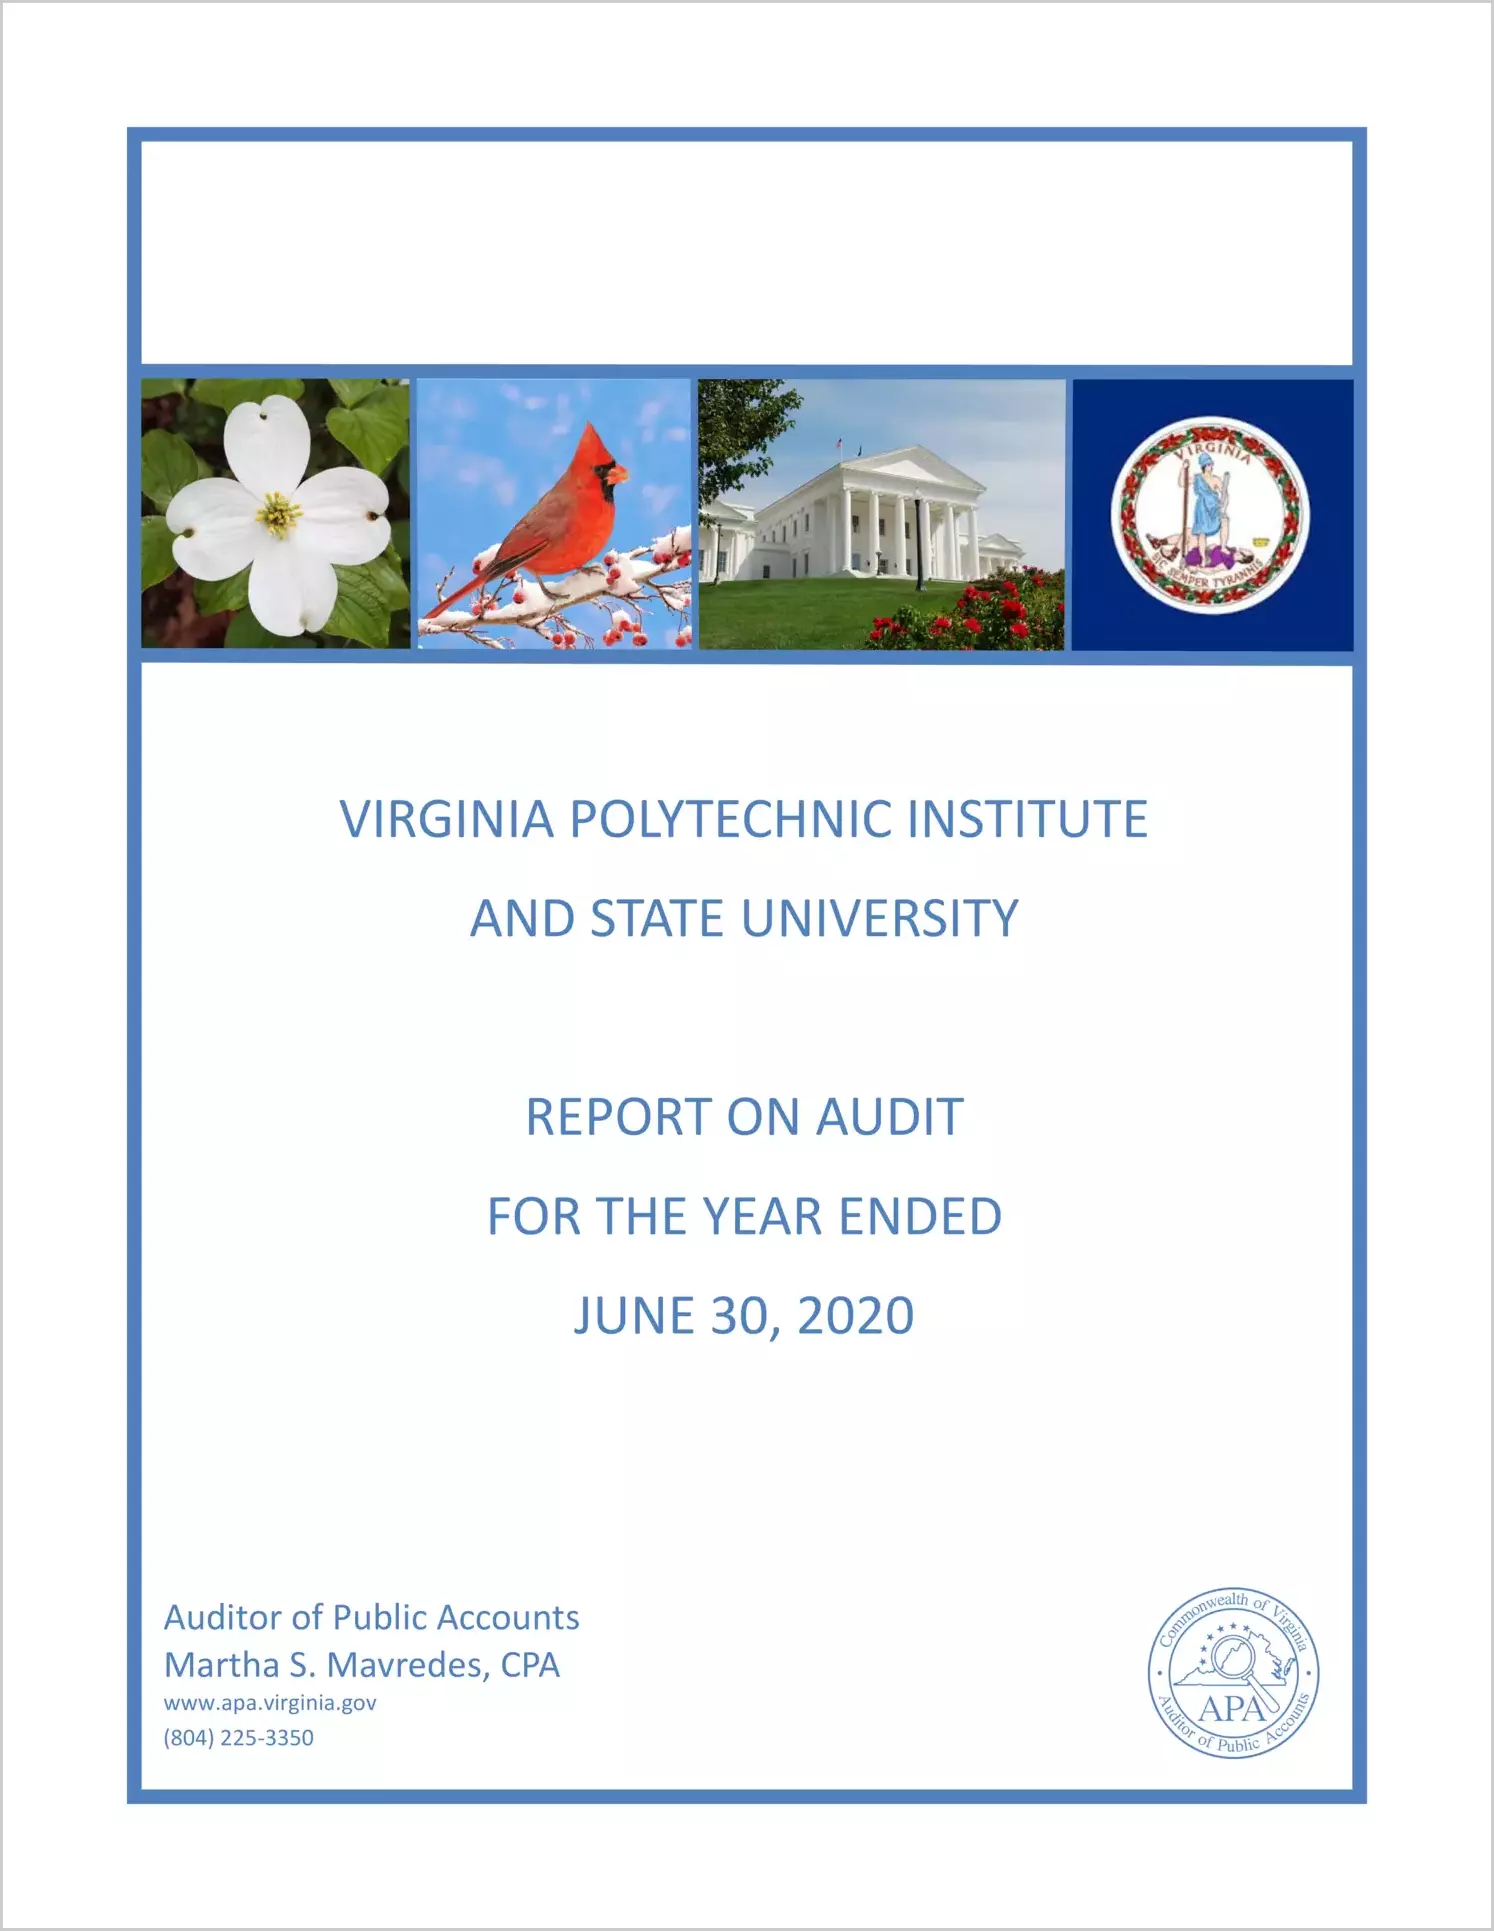 Virginia Polytechnic Institute and State University for the year ended June 30, 2020